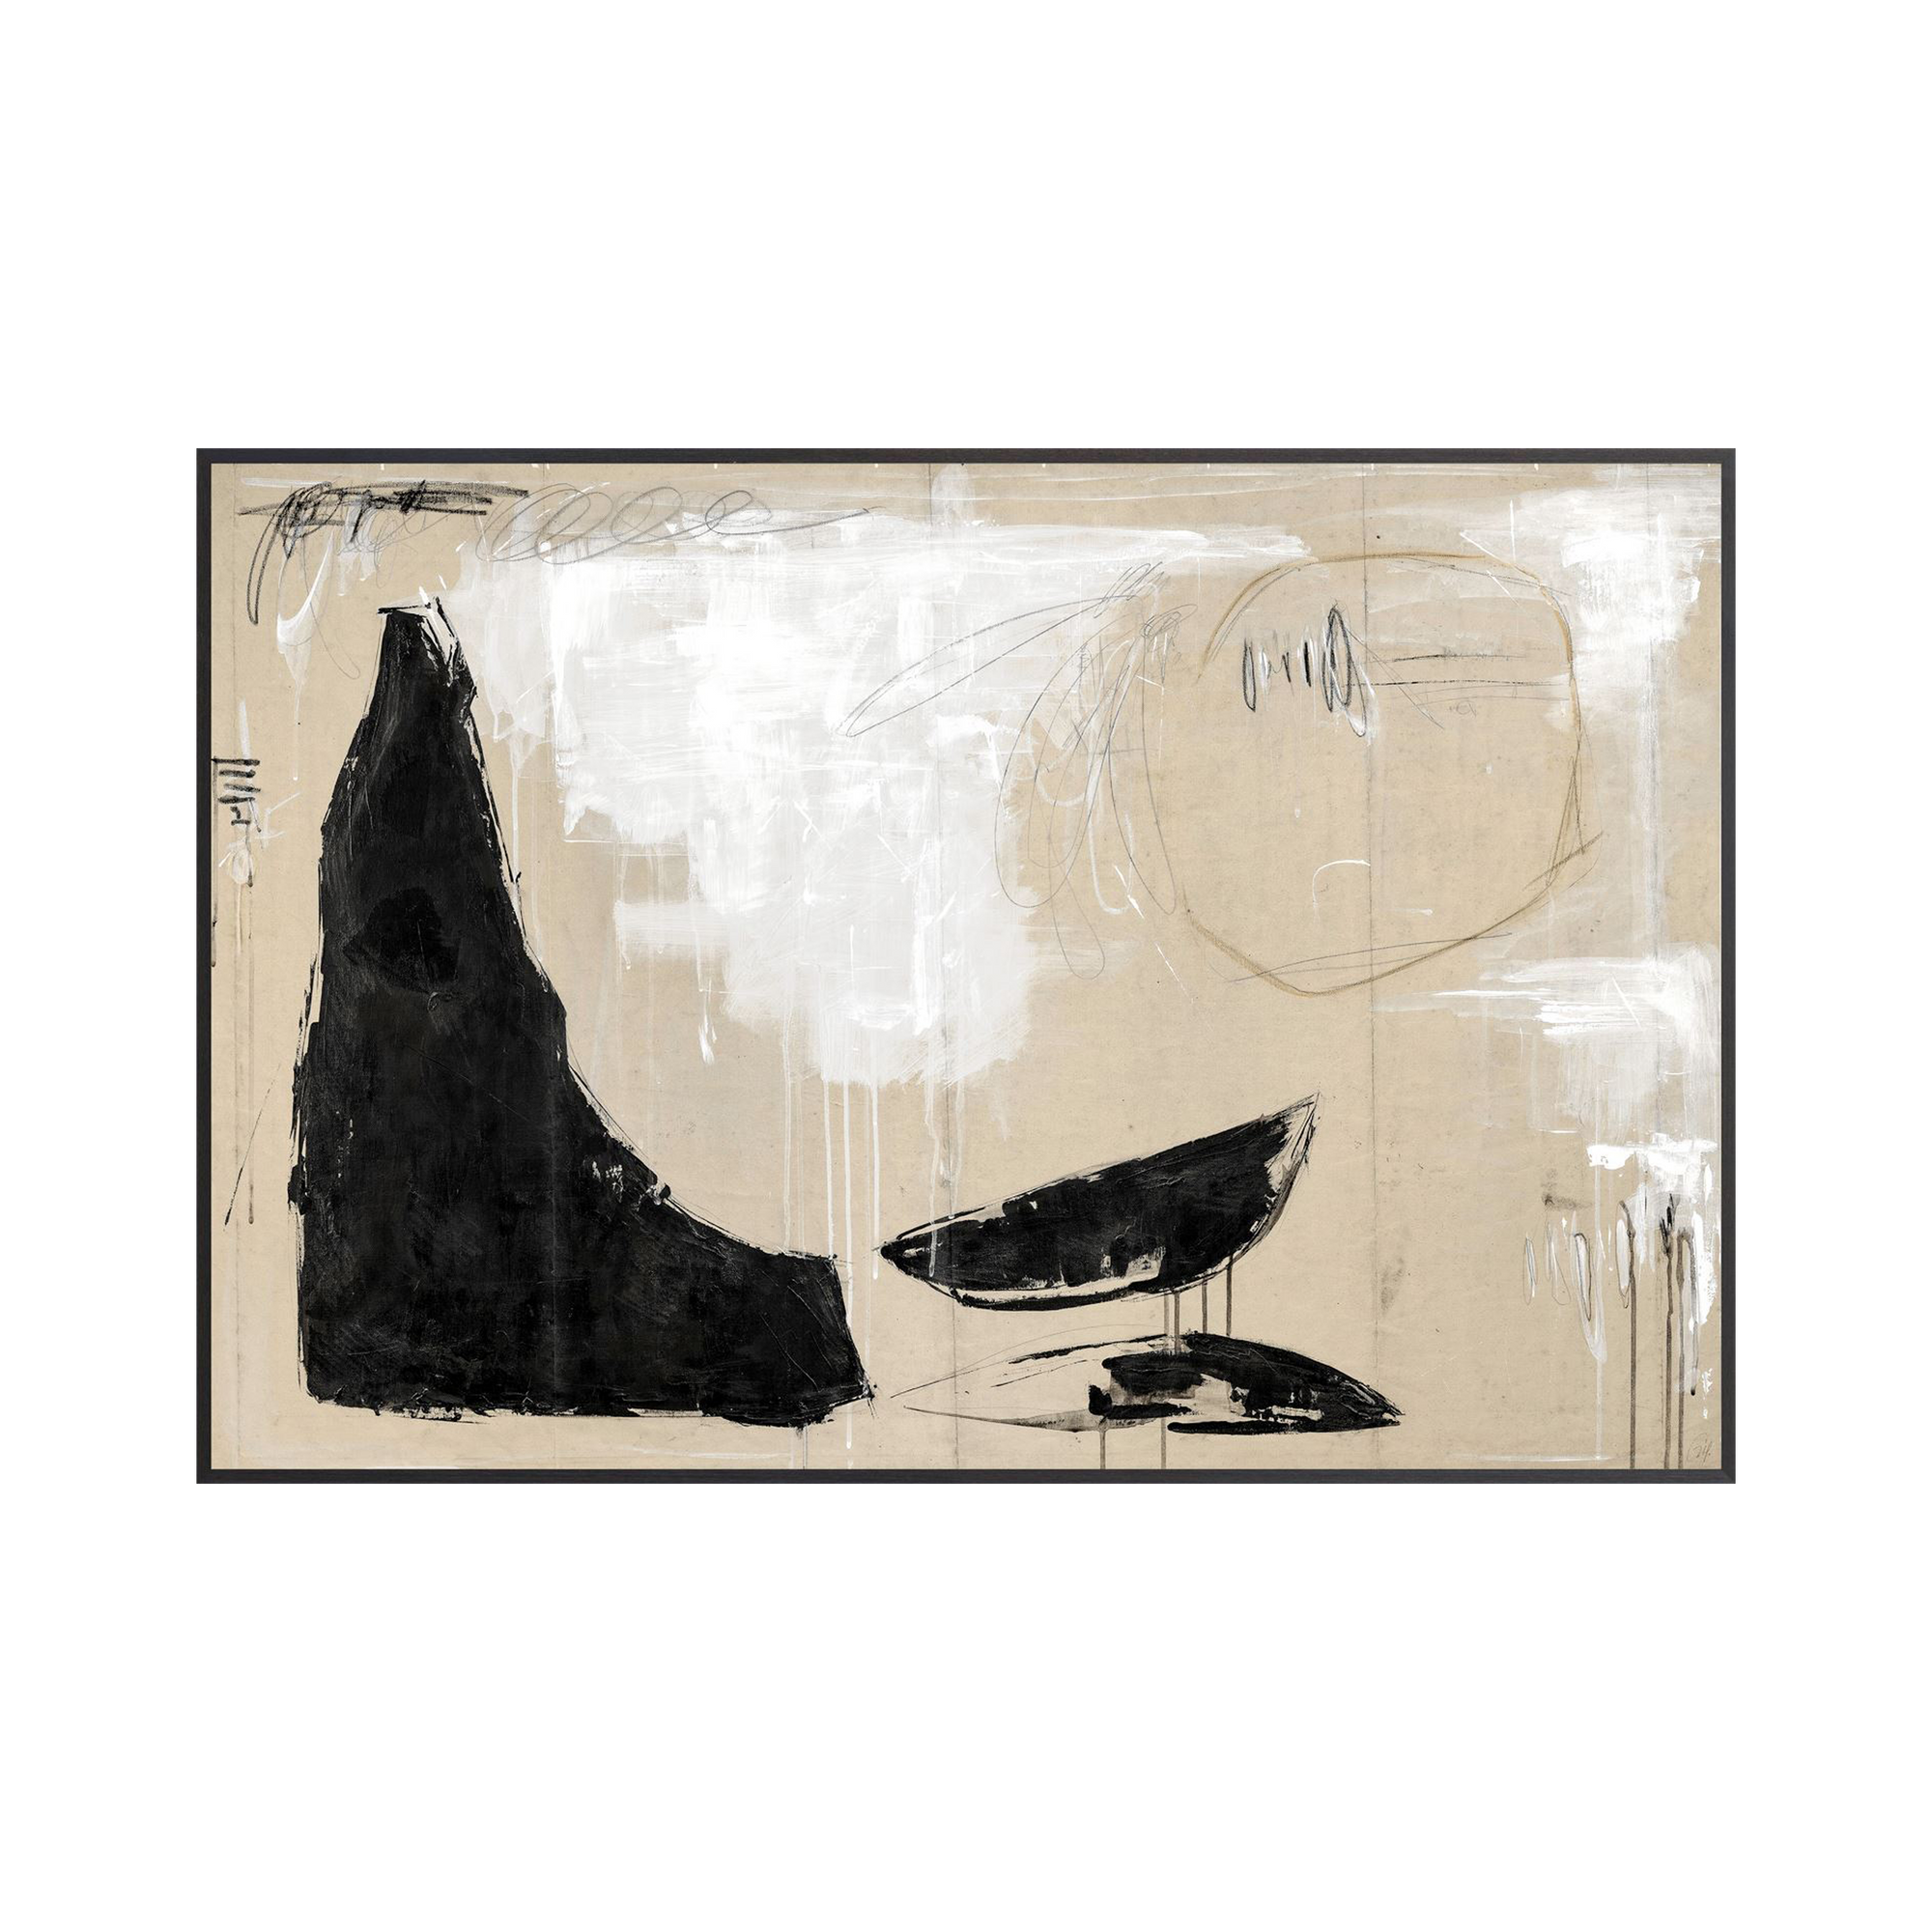 A painterly abstract featured in a black frame.